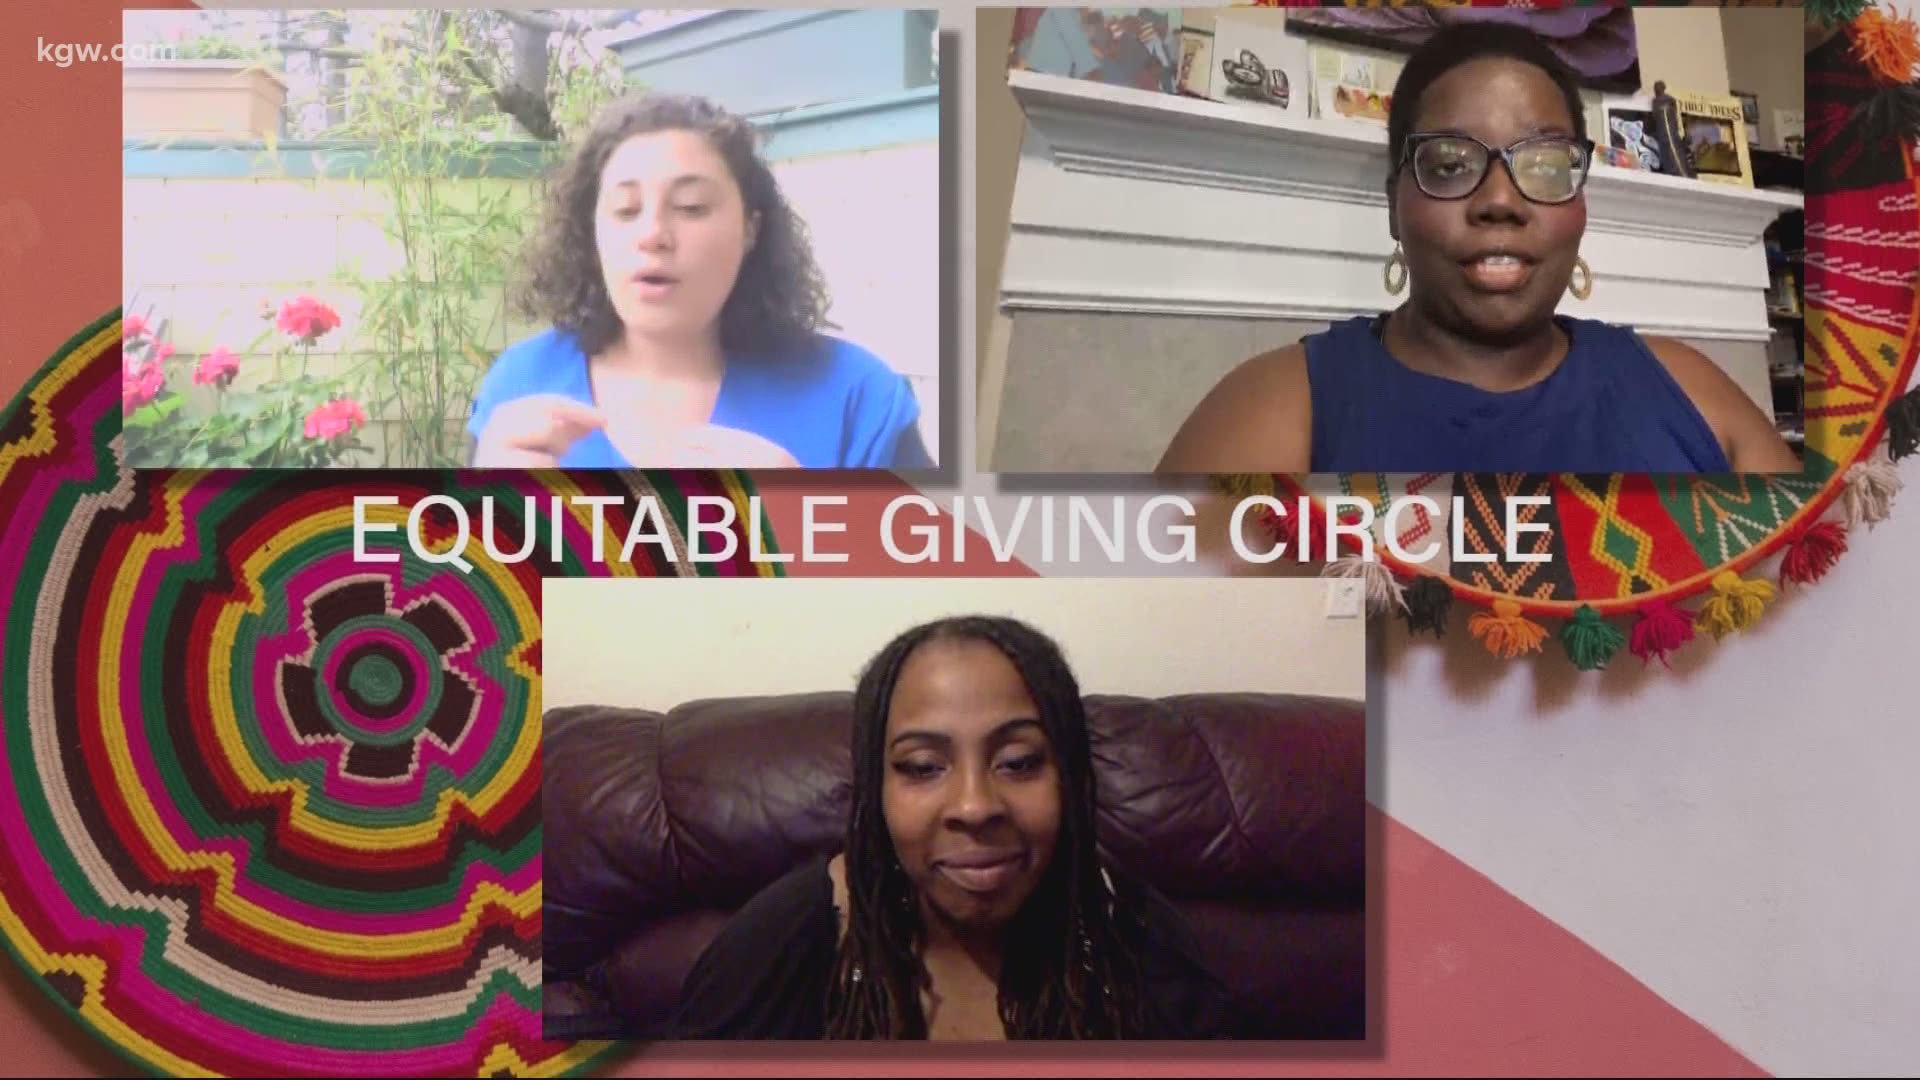 In a few short months, the Equitable Giving Circle has raised more than $500K to empower the Black, Indigenous, People of Color (BIPOC) community.